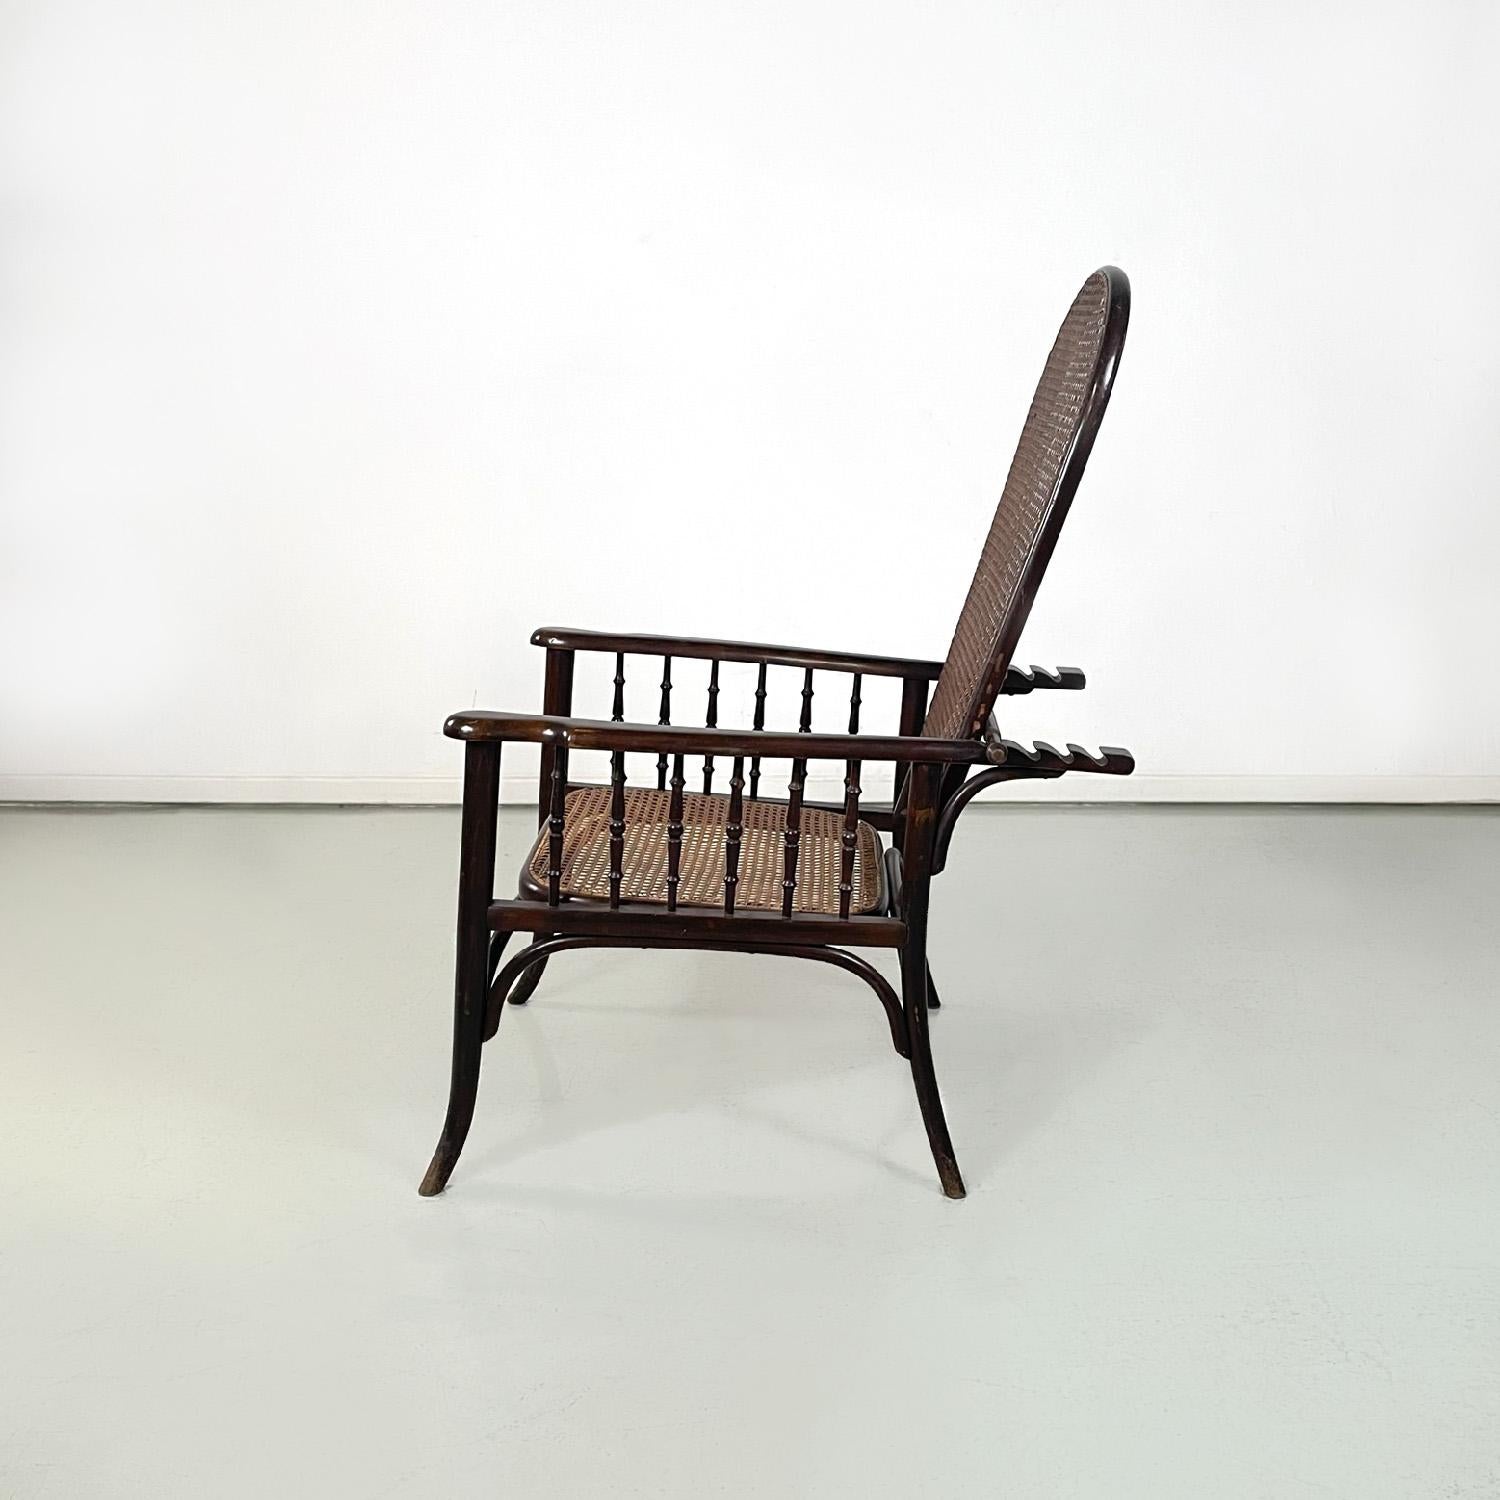 Art deco dark wood and straw armchair with reclining backrest, early 1900s
Wooden armchair. The backrest, in dark Vienna straw, is foldable and it is possible to change its inclination using a stick that moves and fits into various slots in the rear